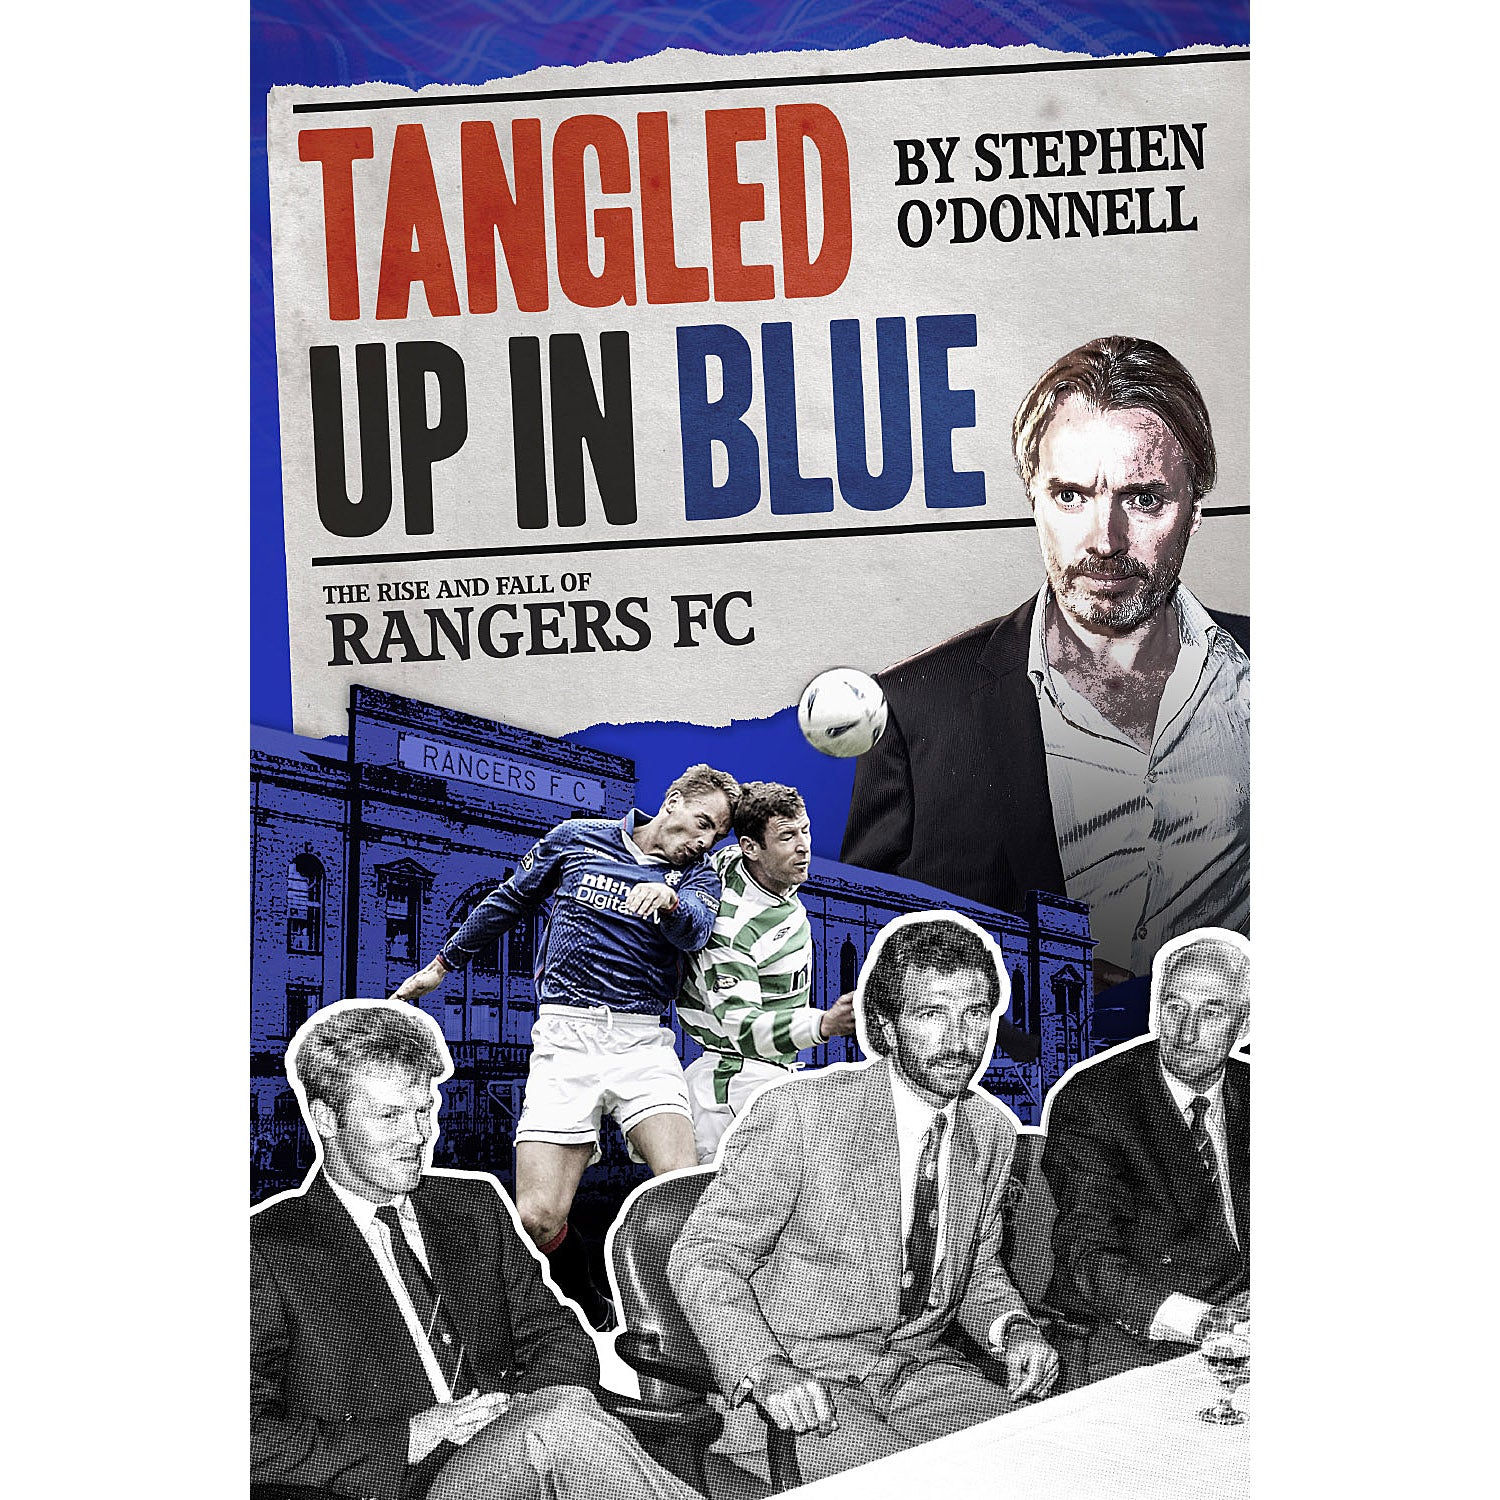 Tangled Up in Blue – The Rise and Fall of Rangers FC